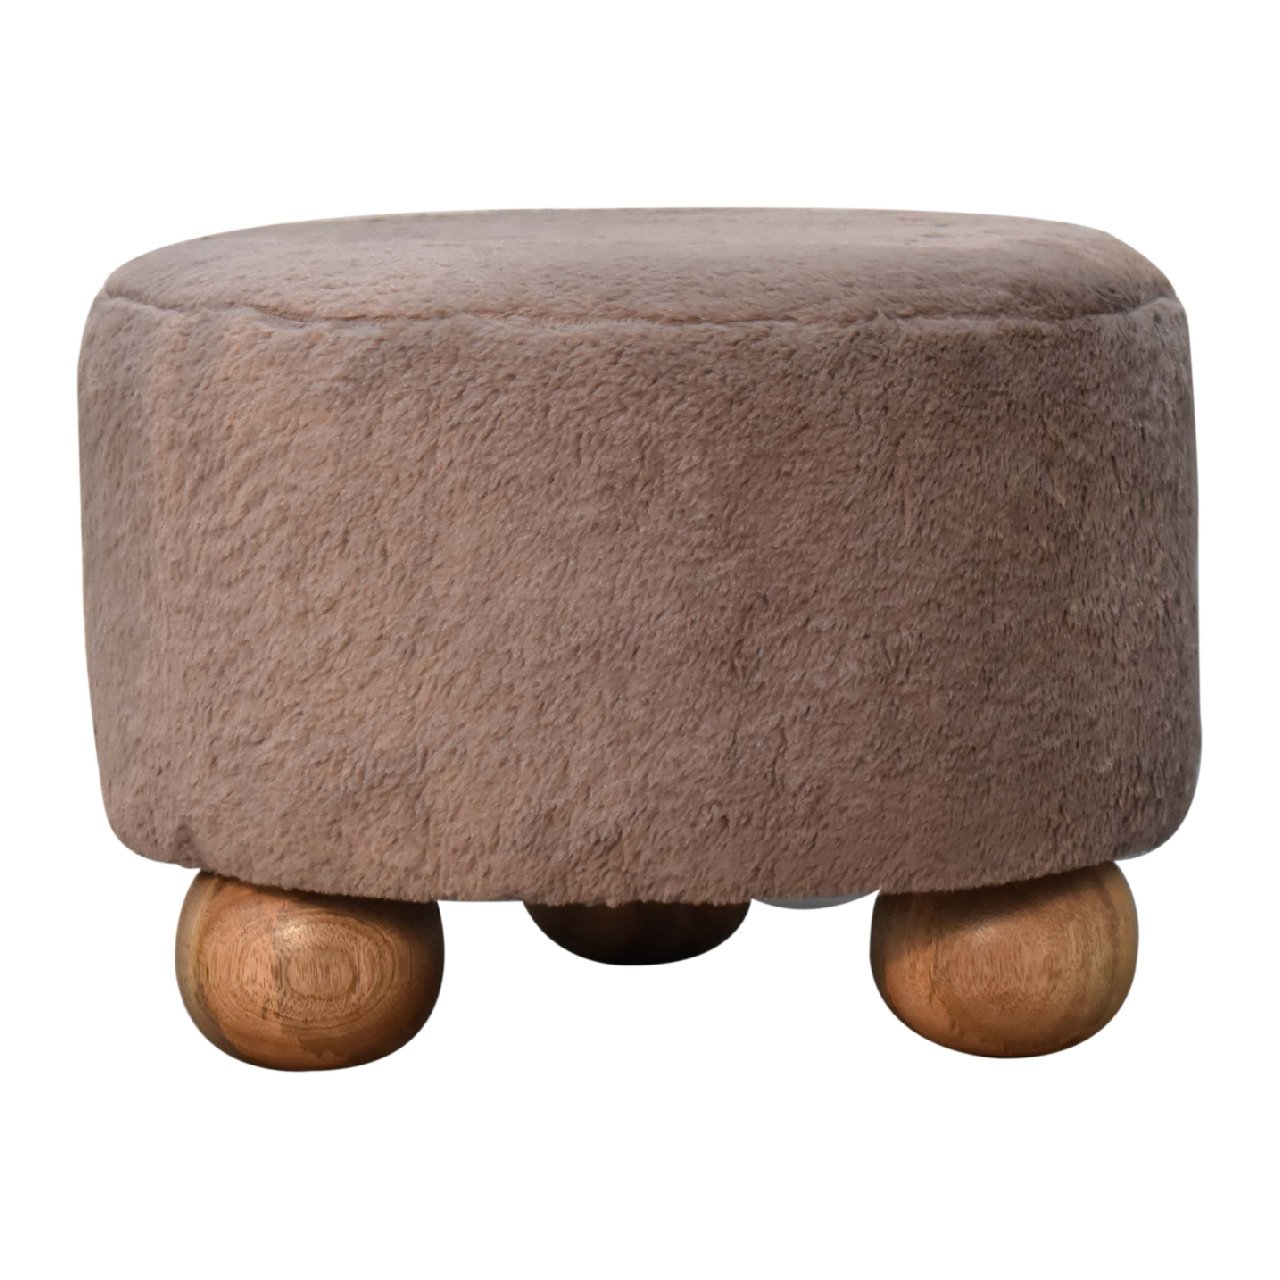 View Mocha Faux Fur Round Footstool with Ball Feet information